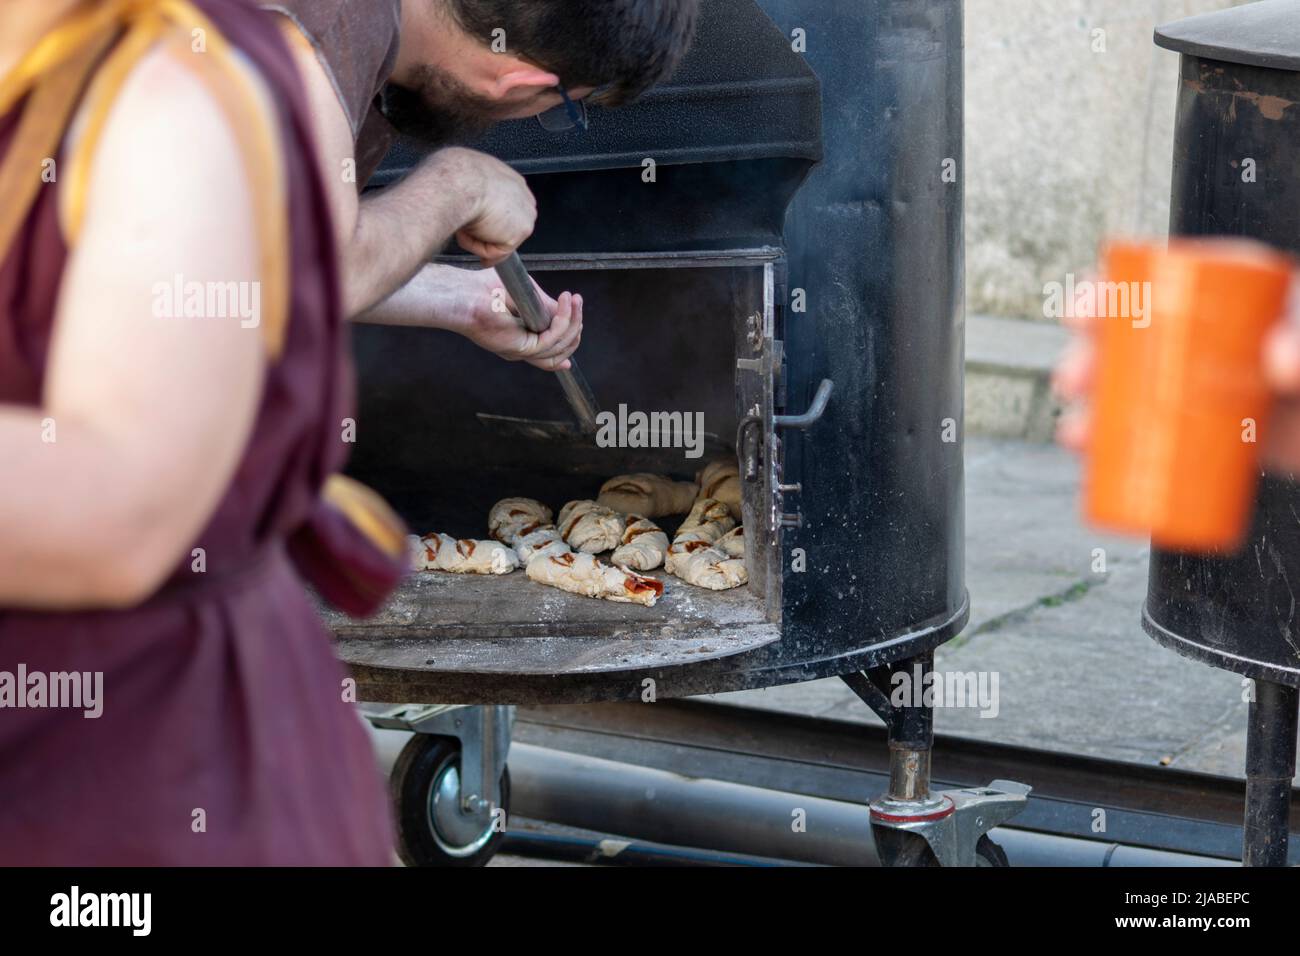 Bread with chorizo, a traditional recipe prepared in a wood oven. Traditional food at traditional events or fairs. Street food and beer vendors. Stock Photo